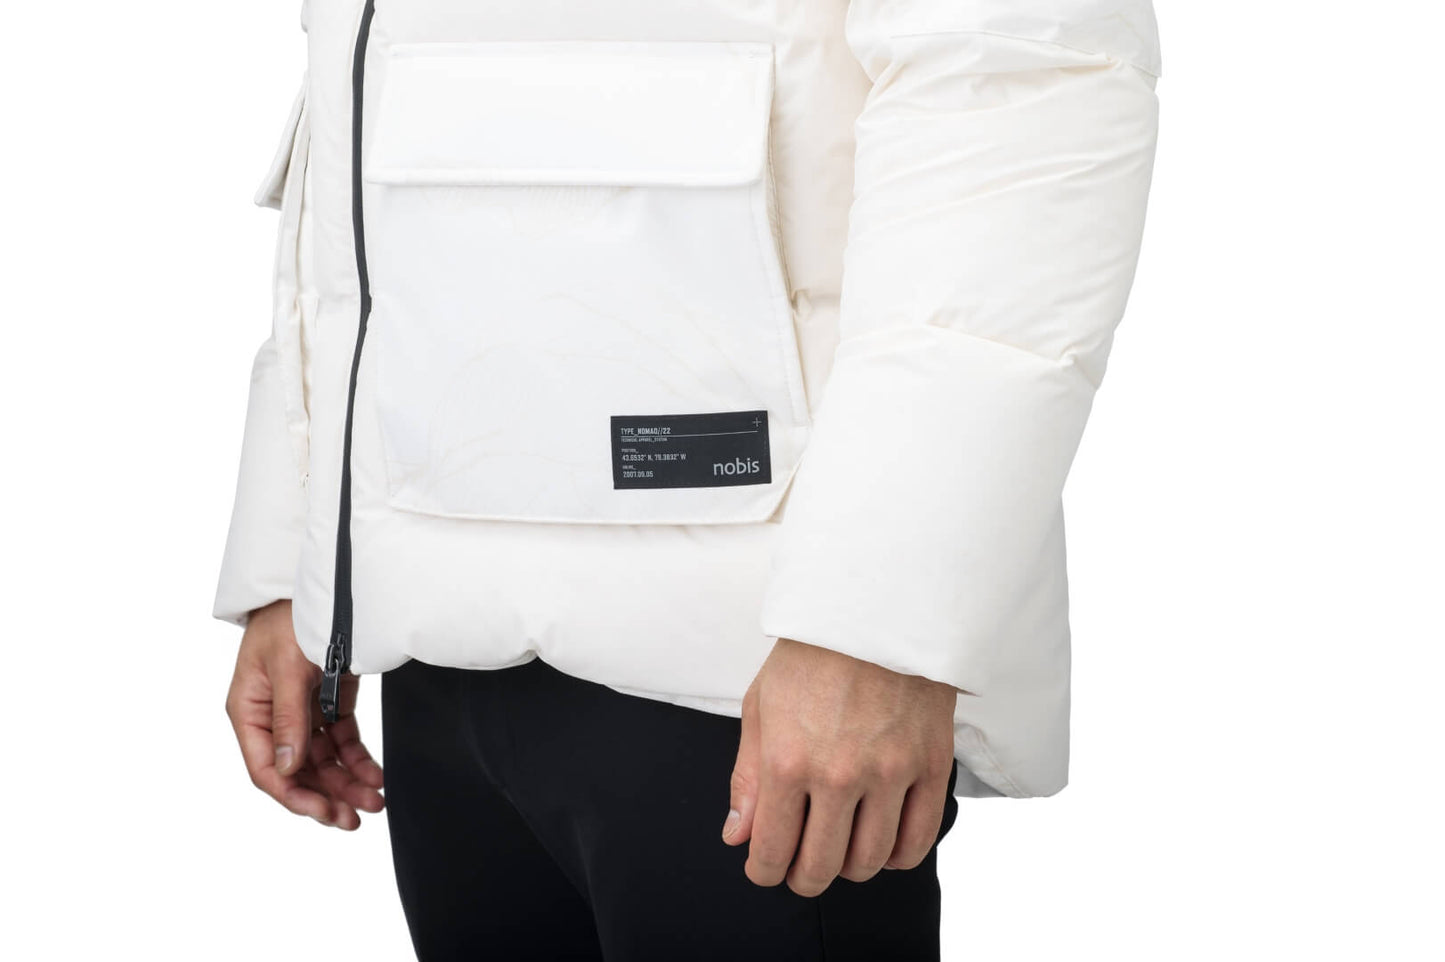 Supra Men's Performance Puffer in hip length, Technical Taffeta and 3-Ply Micro Denier fabrication, Premium Canadian White Duck Down insulation, non-removable down filled hood, centre front two-way zipper, flap pockets at waist, and zipper pocket at left bicep, in Wheat Desert